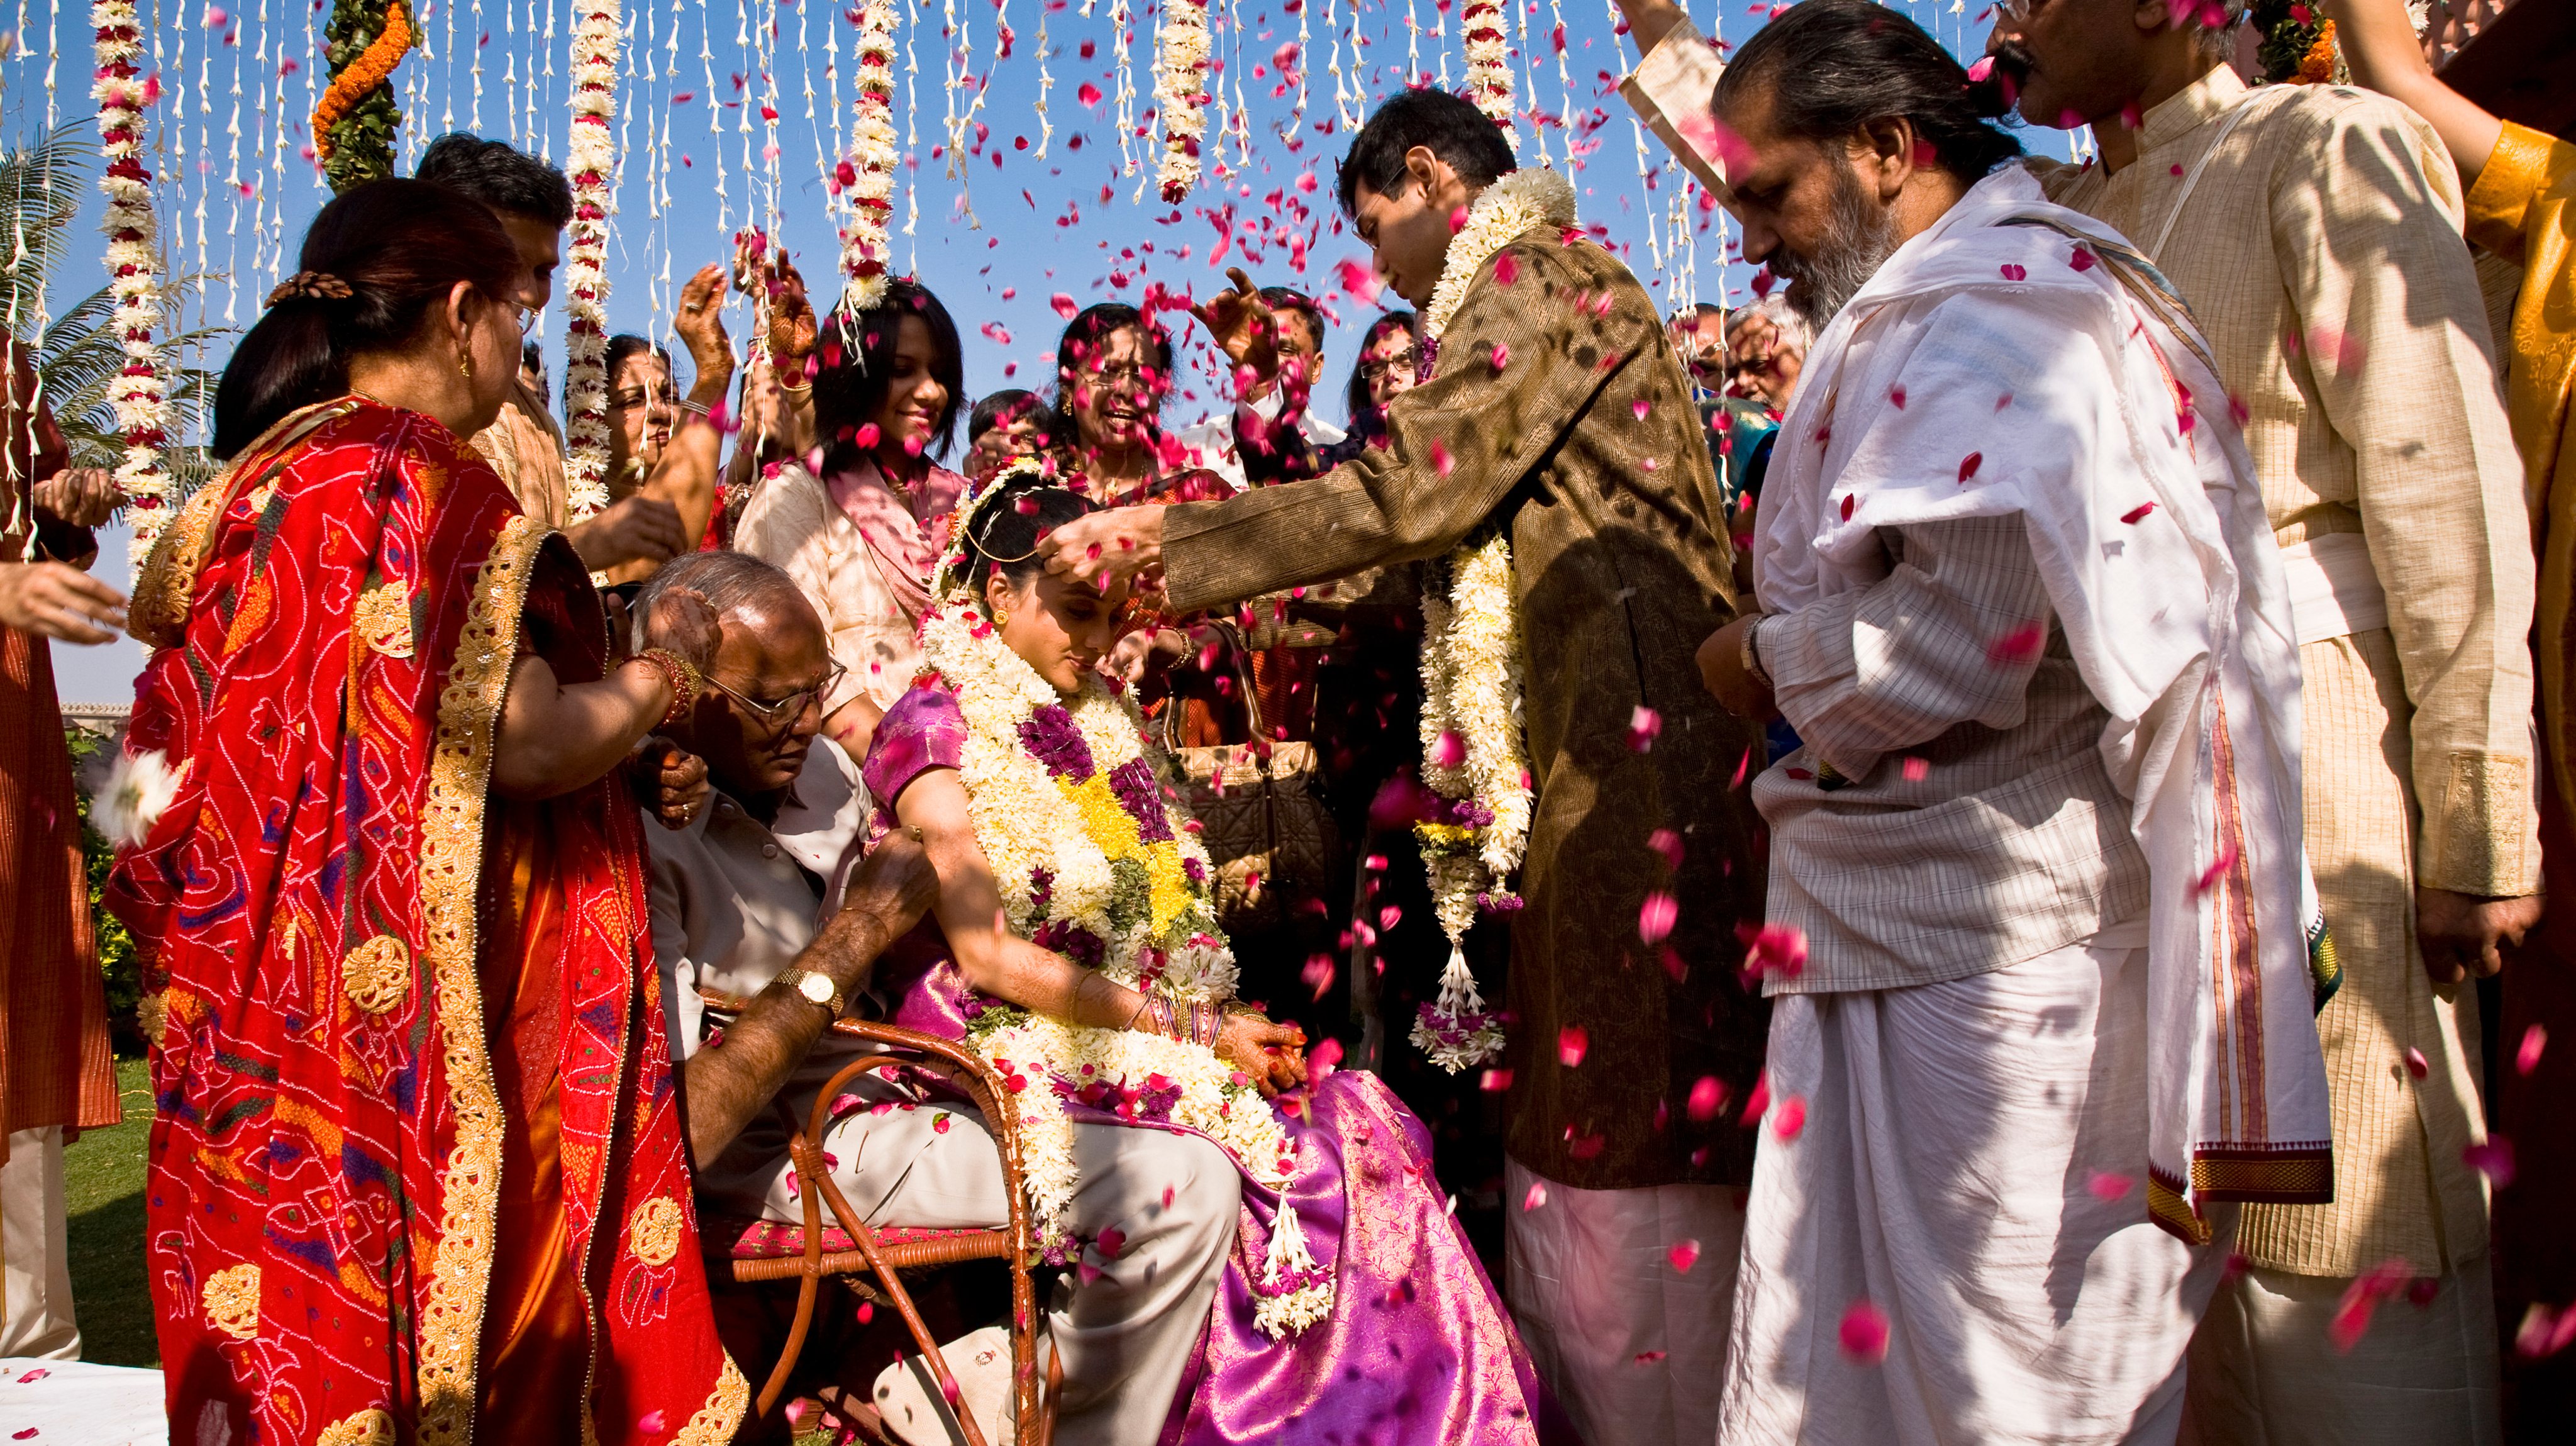 India - Neemrana - A newly wed Hindu couple fulfill the final moments of their three day wedding